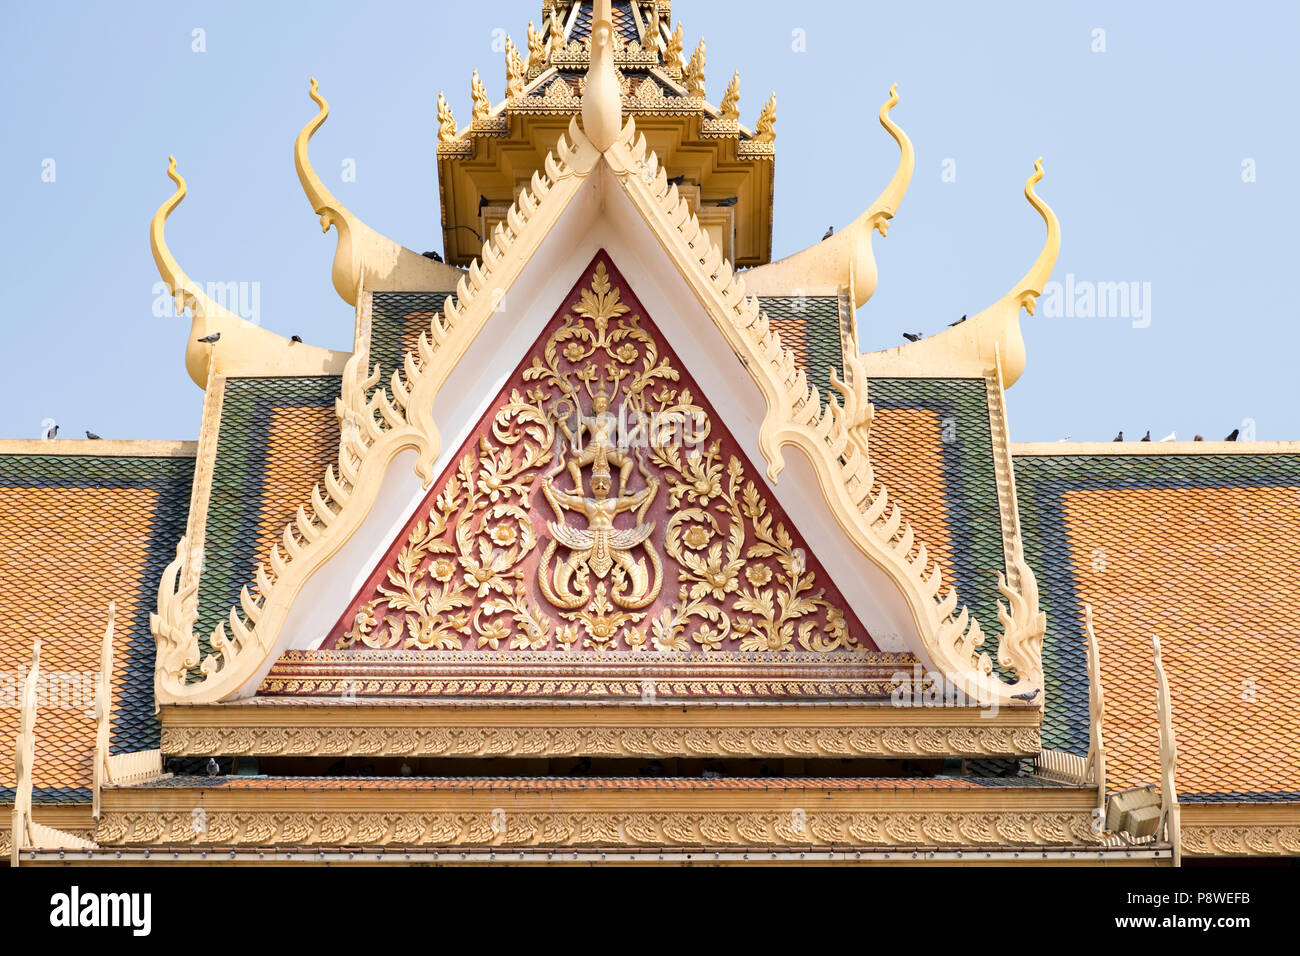 Detail of Khmer art and decoration of a roof of a bulding at the Royal Palace of Phnom Penh, Cambodia Stock Photo